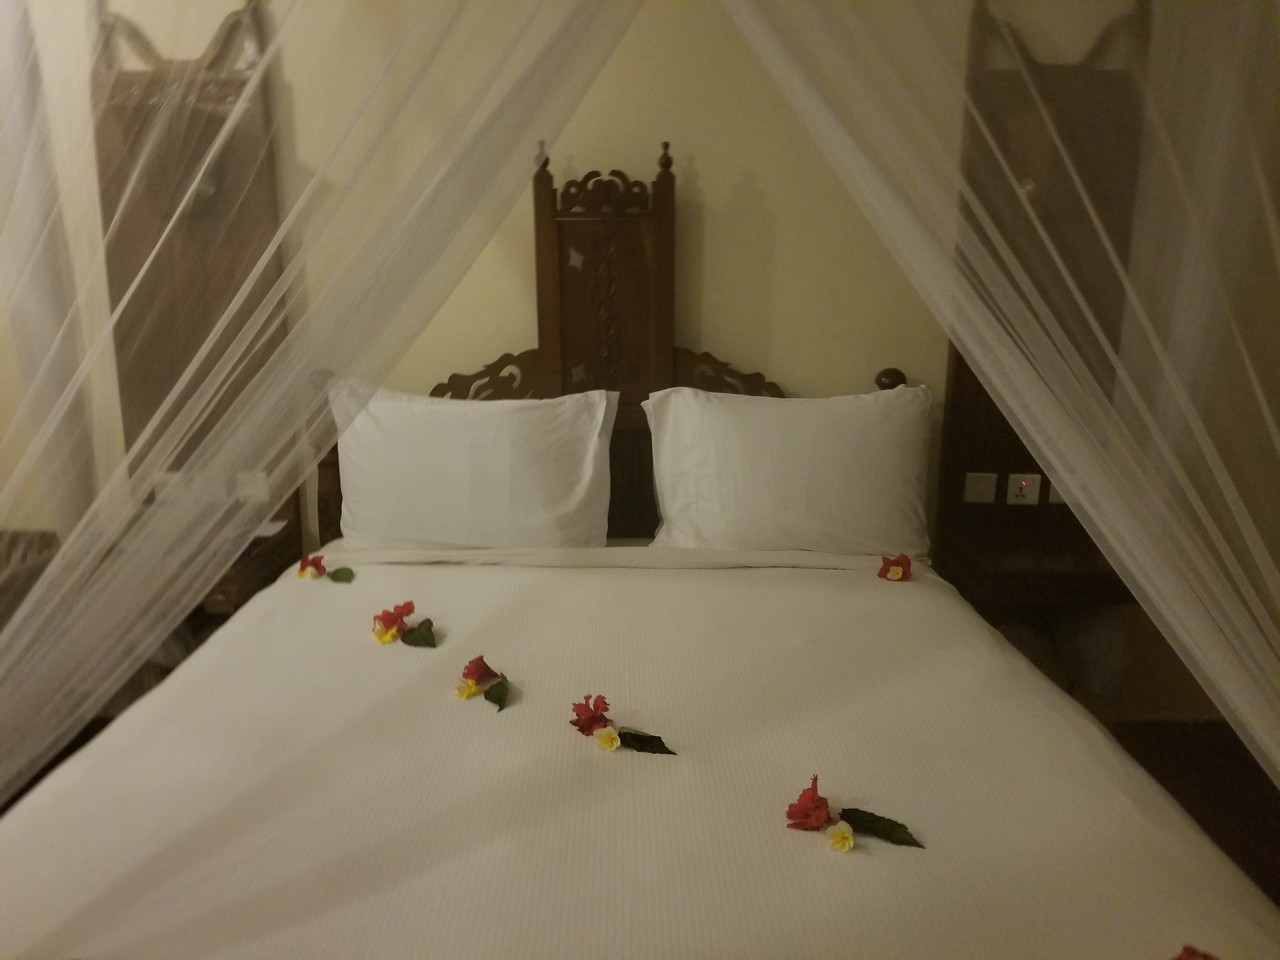 a bed with flowers on it